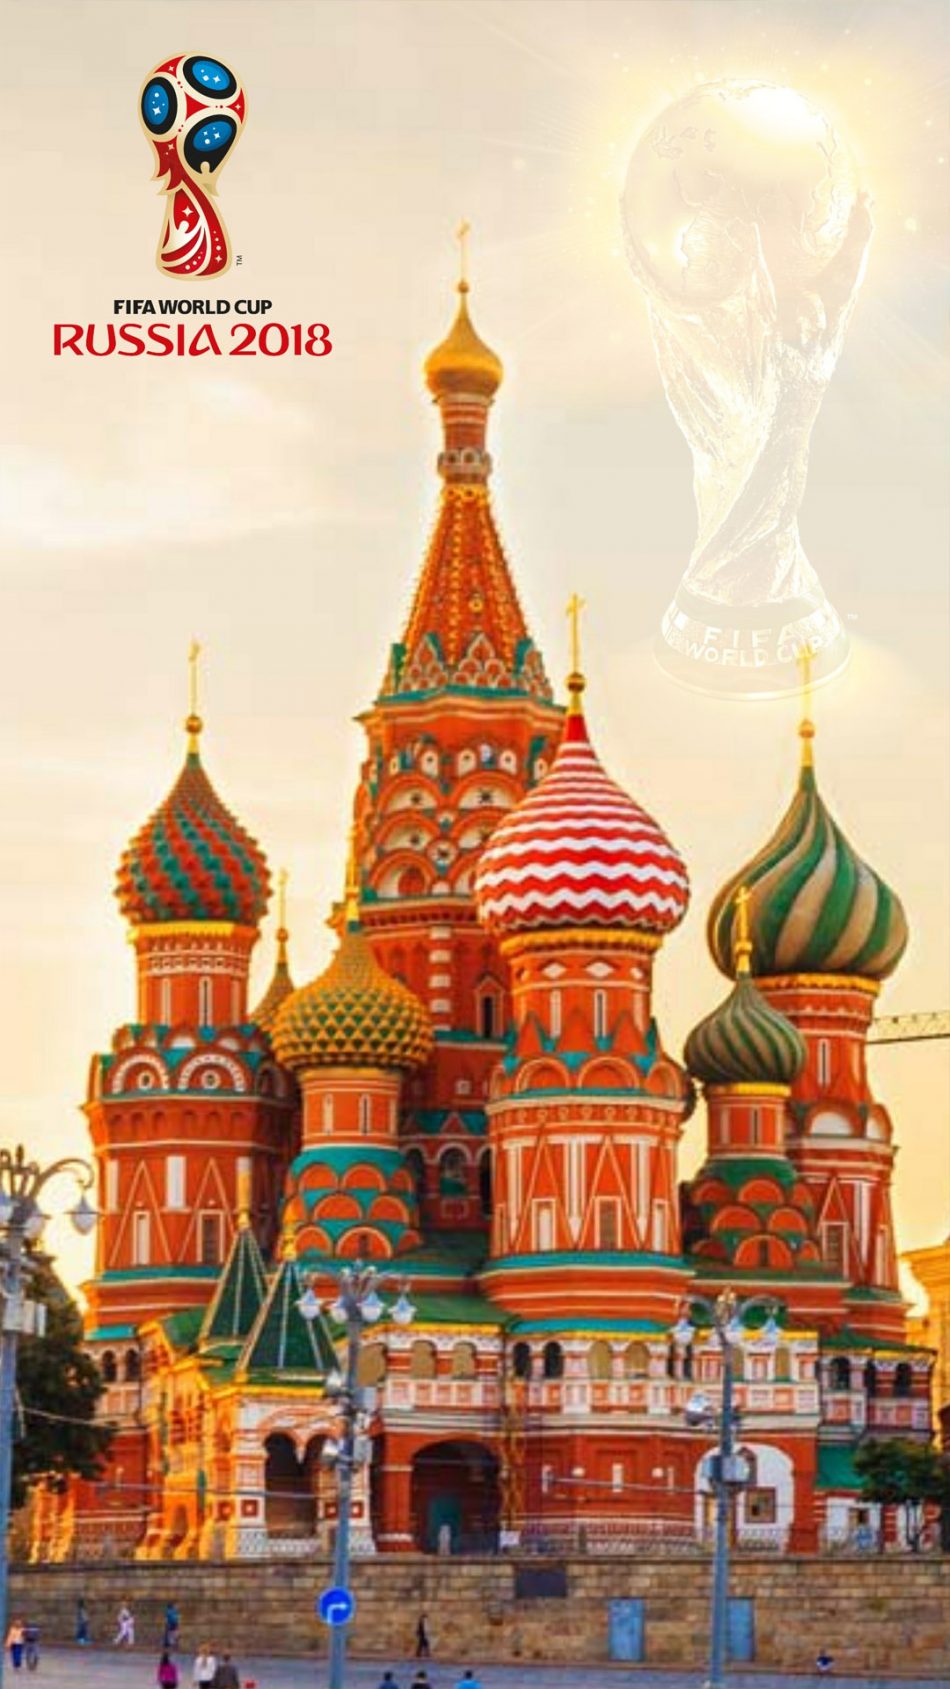 Russia Fifa World Cup 2018 Hd Mobile Wallpaper - Saint Basil's Cathedral - HD Wallpaper 